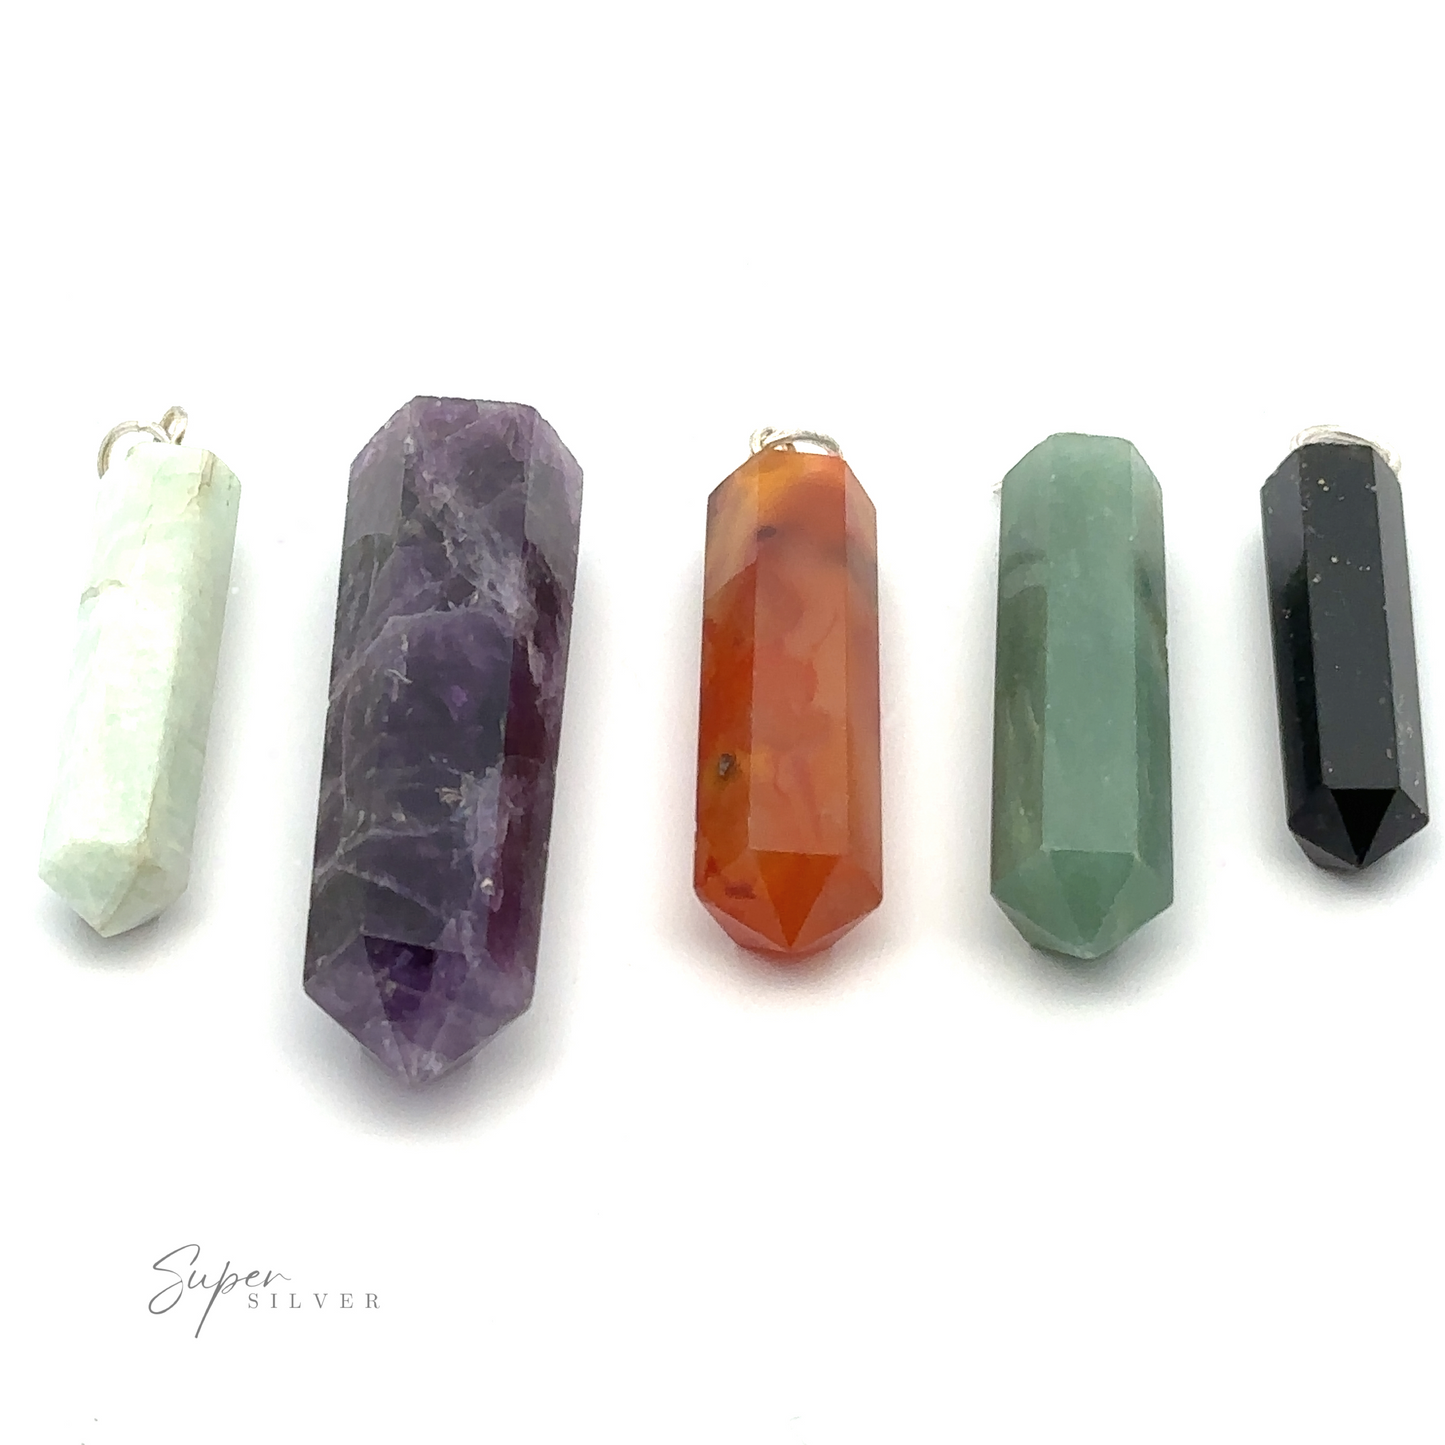 
                  
                    Five hexagonal crystal pendants of varying colors and sizes are arranged in a row against a white background. From left to right, the Raw Stone Obelisk Pendants boast colors of white, purple, orange, green, and black.
                  
                